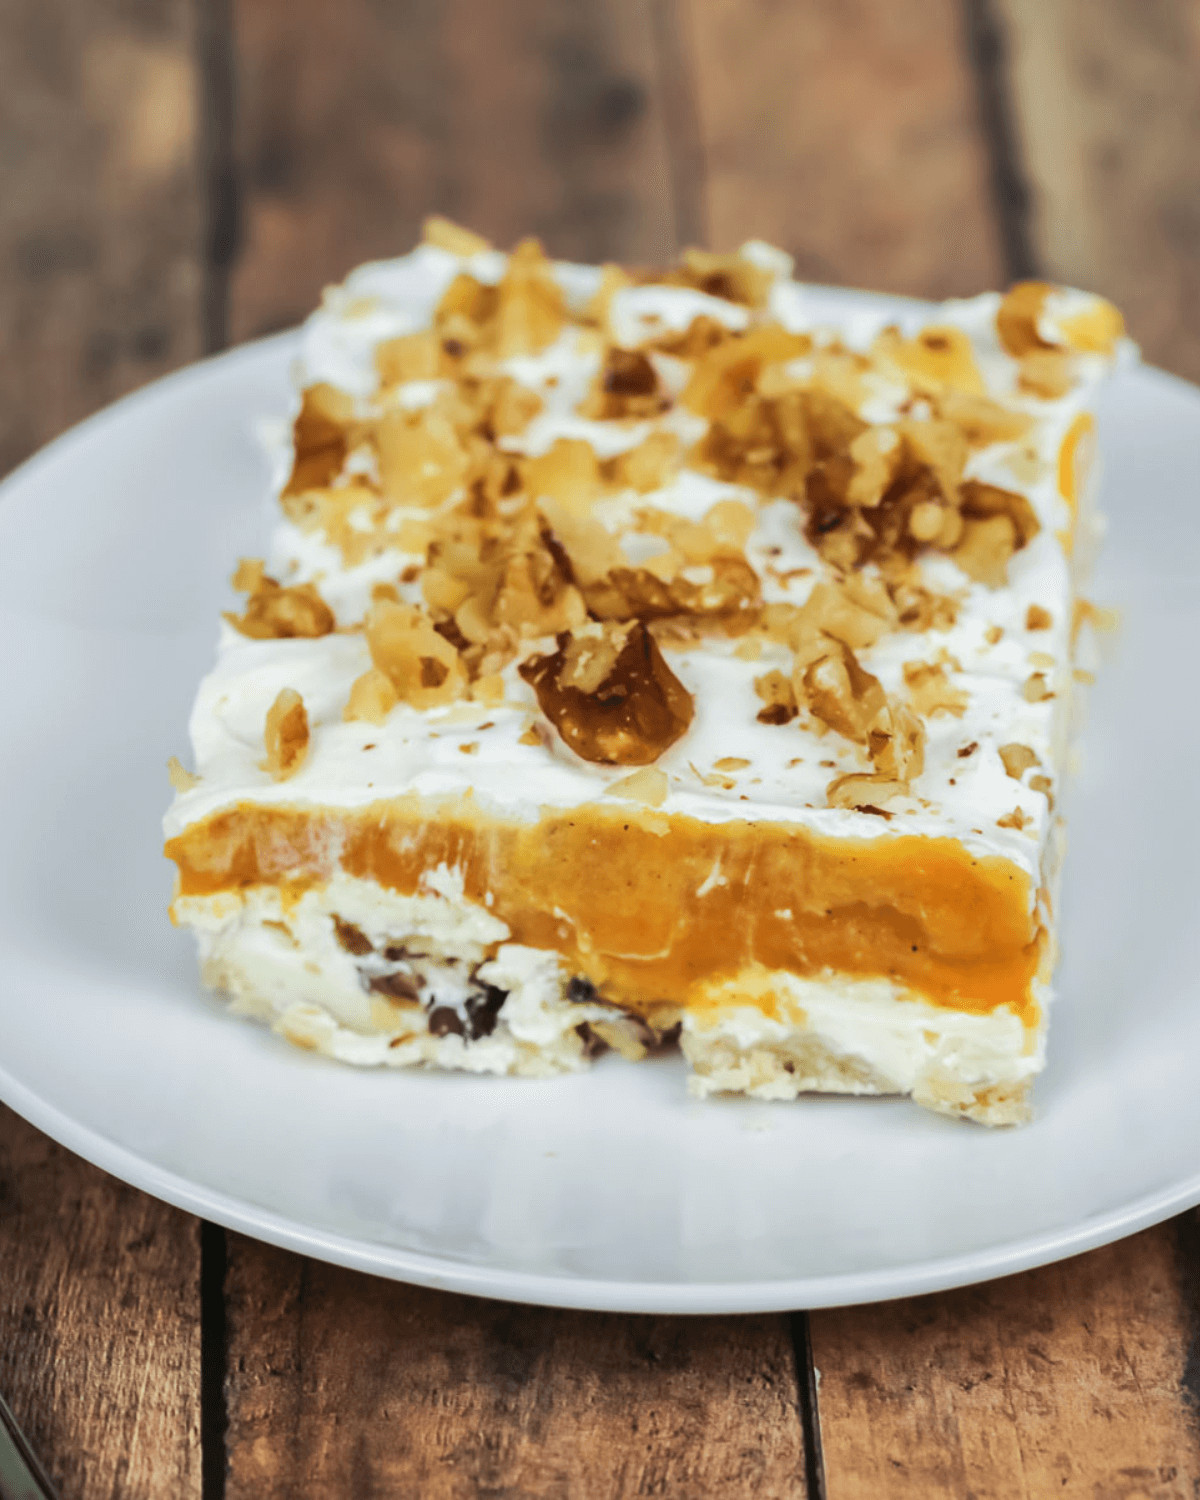 A side view of the pumpkin lush with nuts on top.